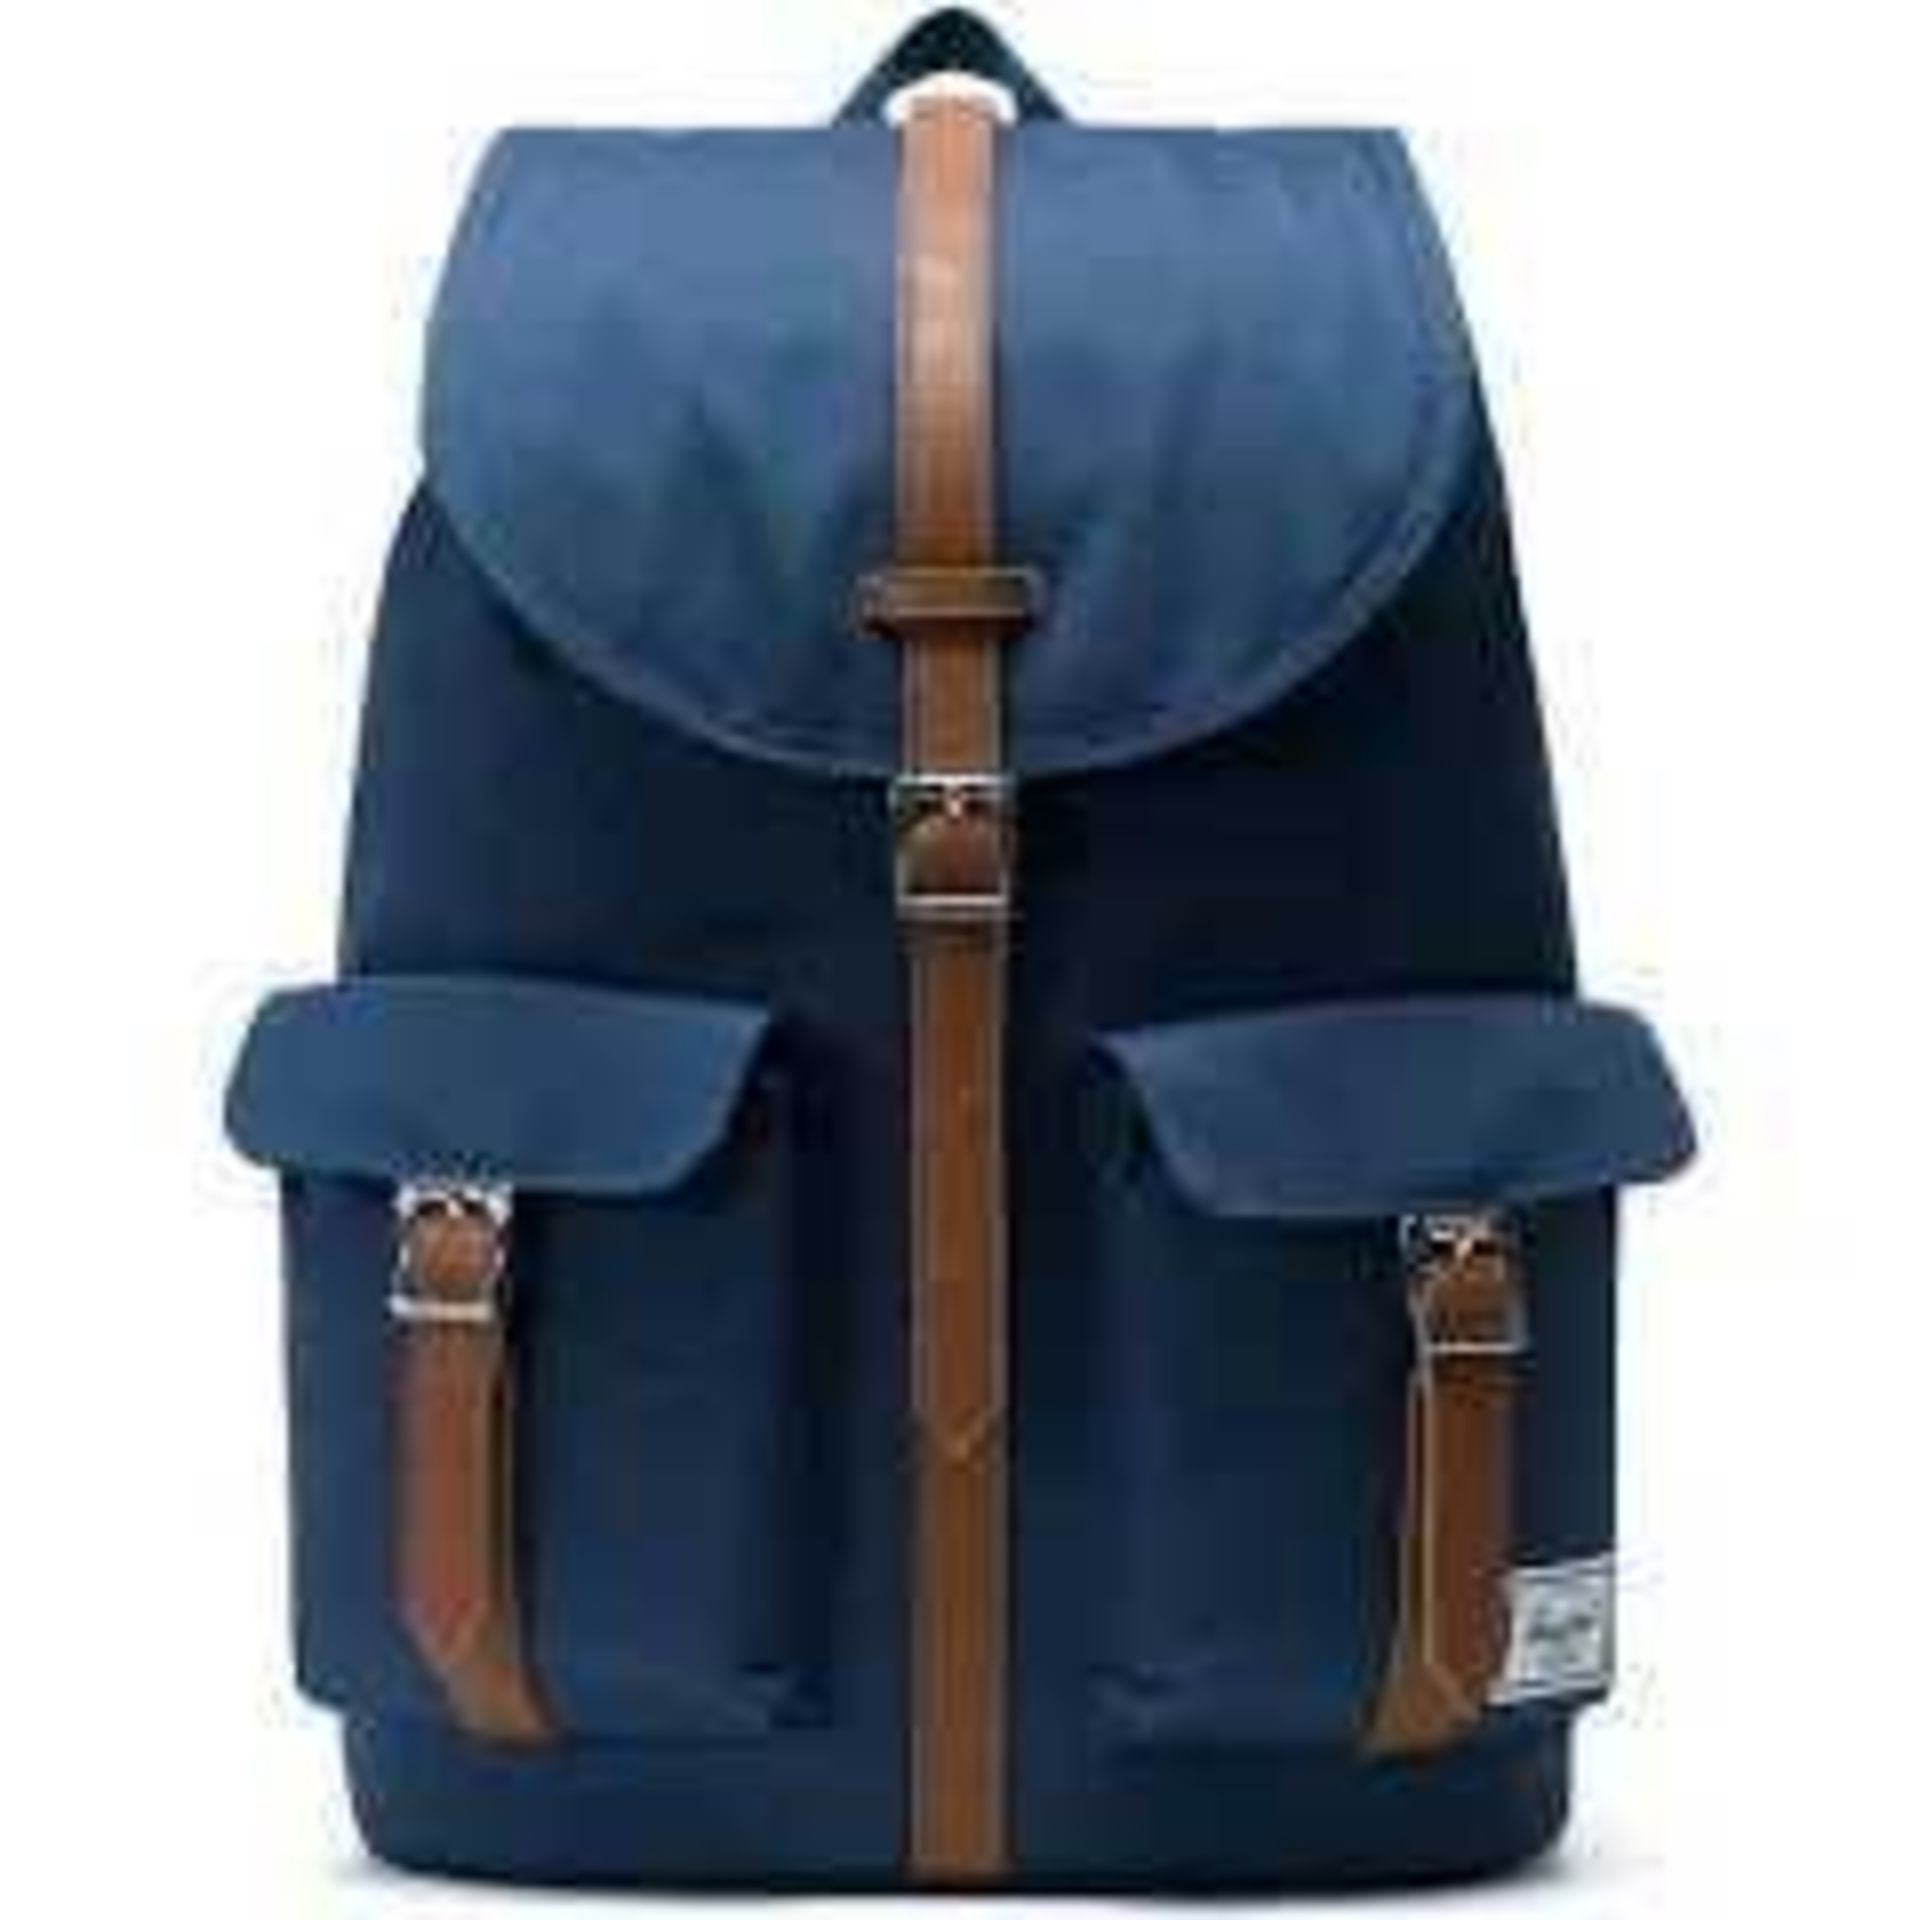 RRP £70 Herschel Dawson Backpack 231689 (Appraisals Available On Request) (Pictures For Illustration